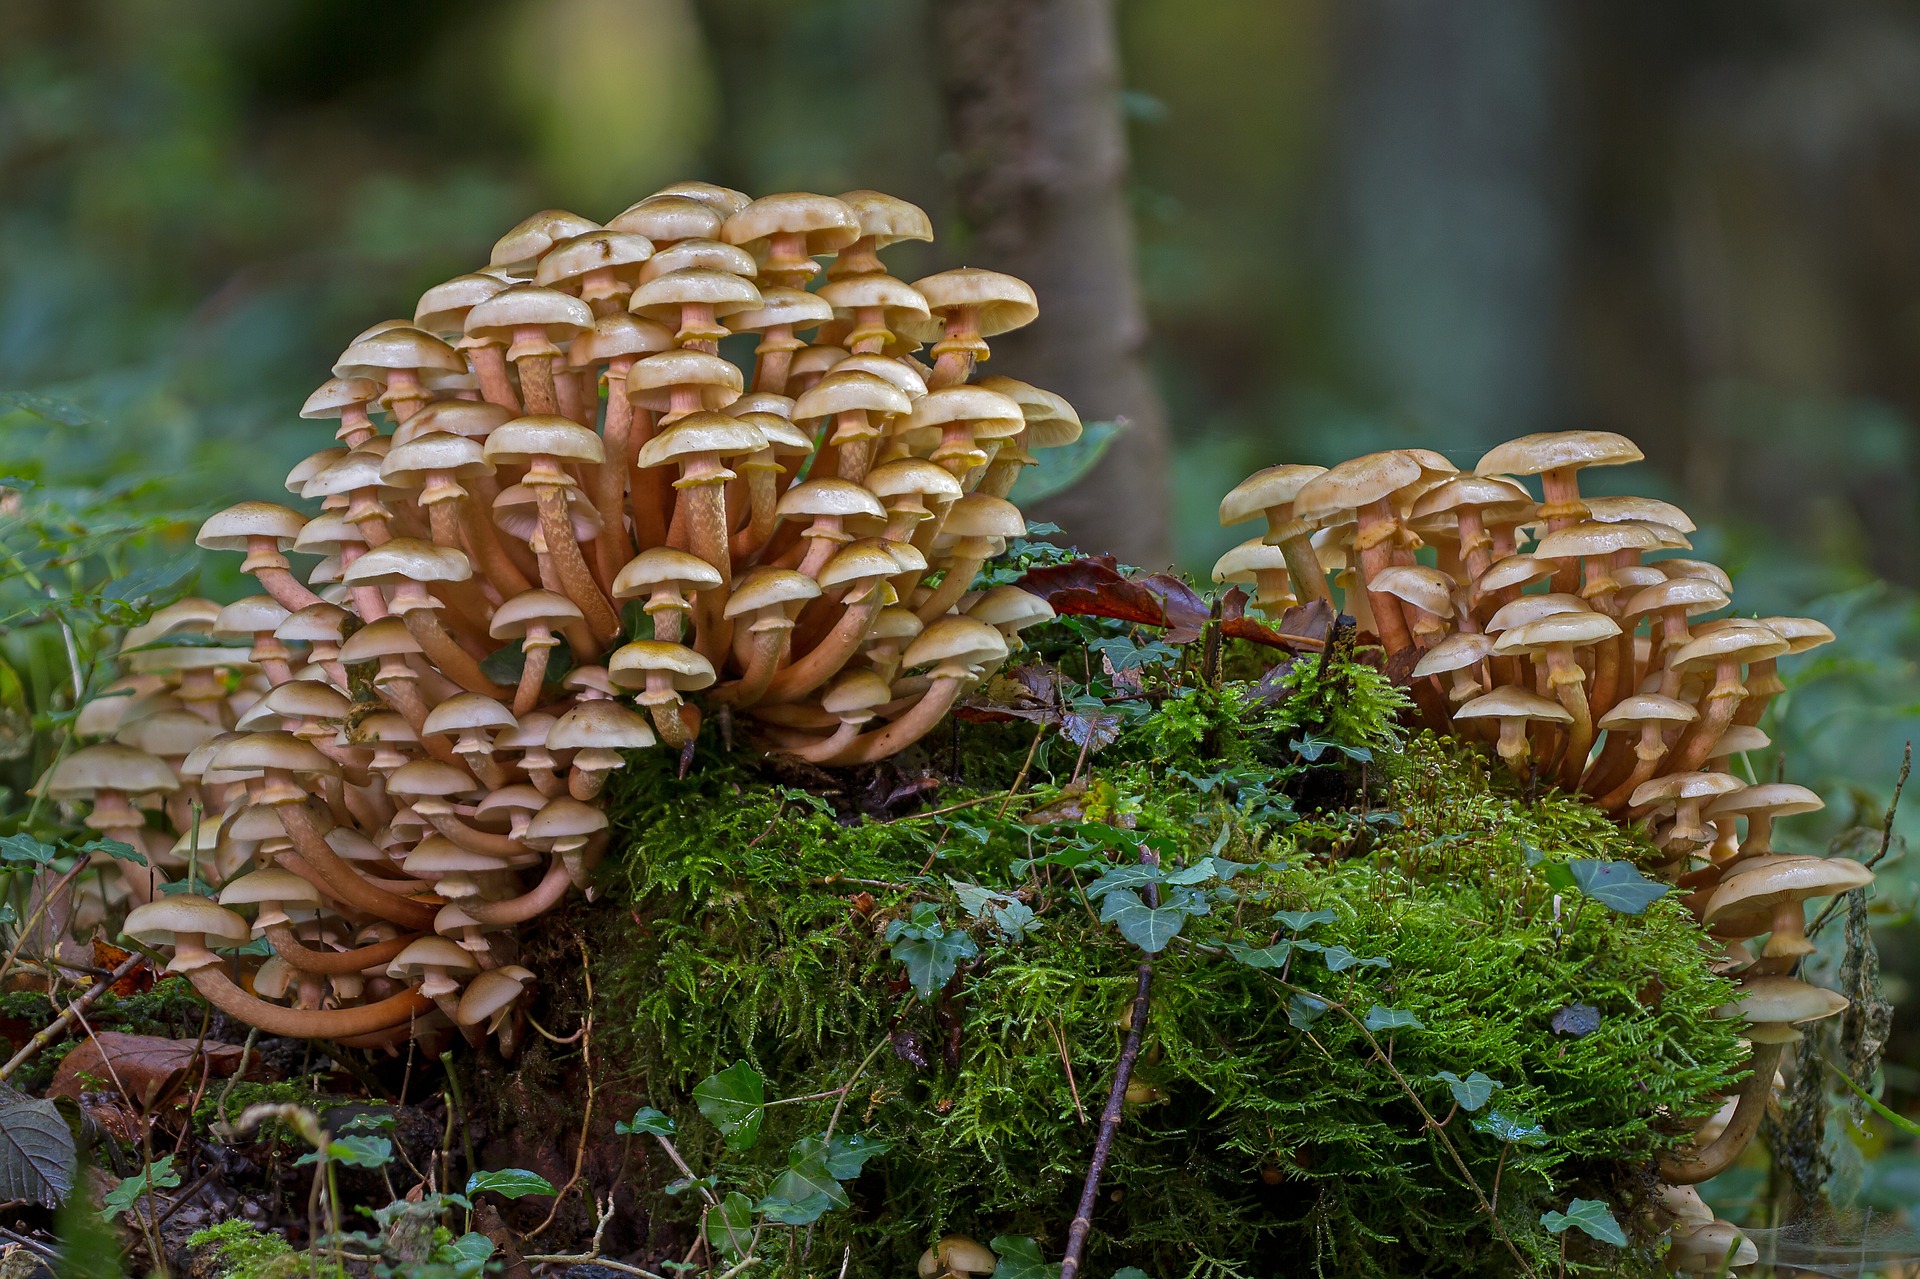 Breakthrough technologies for a sustainable mushroom industry